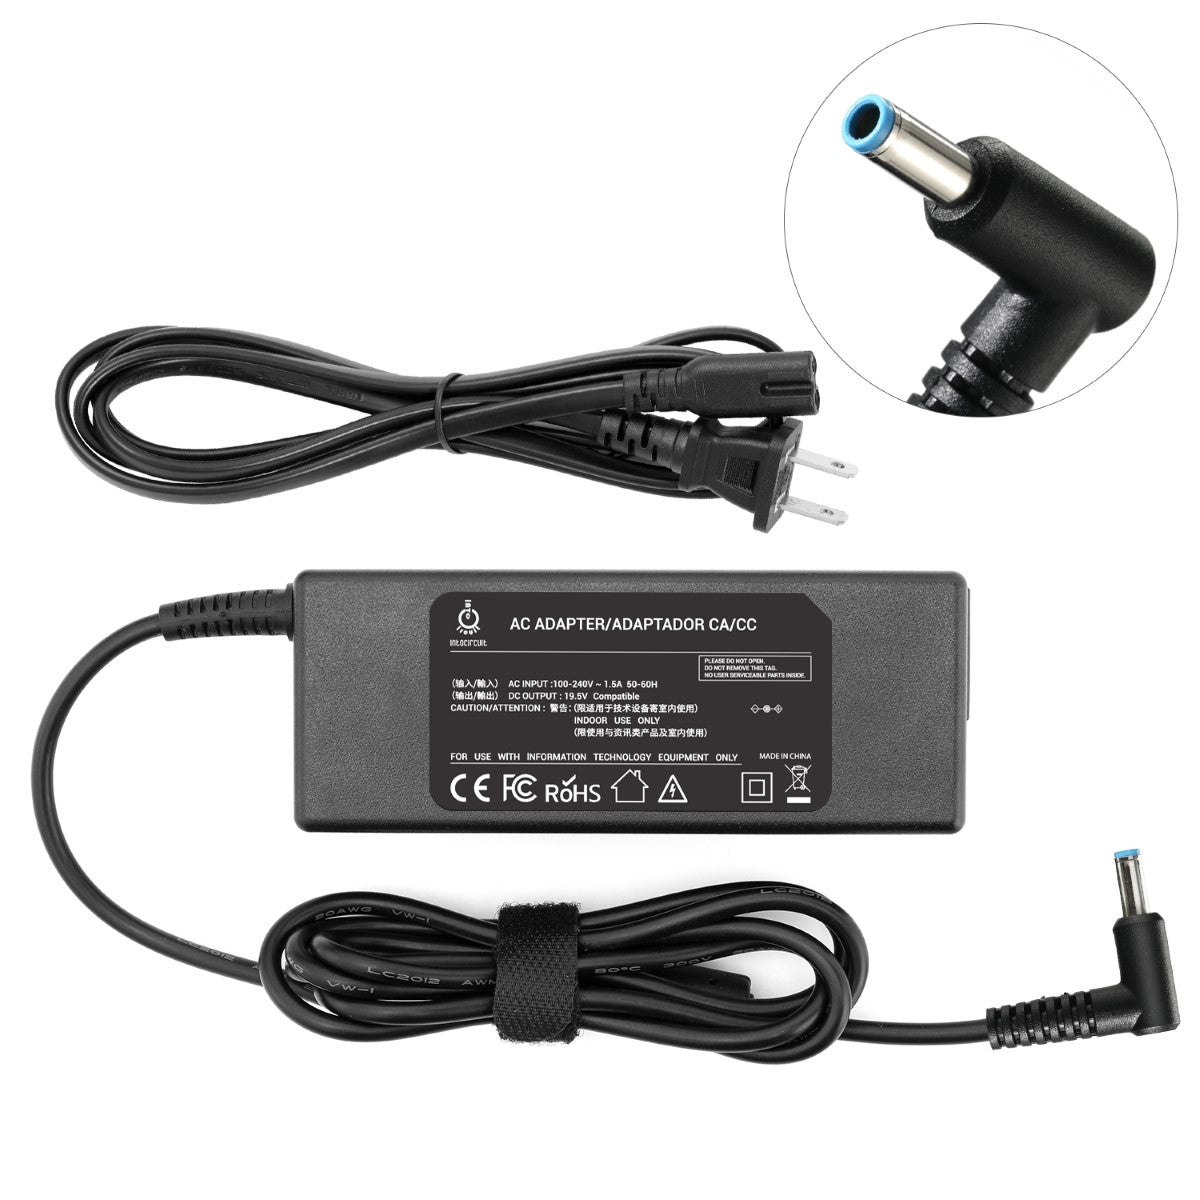 Charger for HP Pavilion 17-g061us Laptop